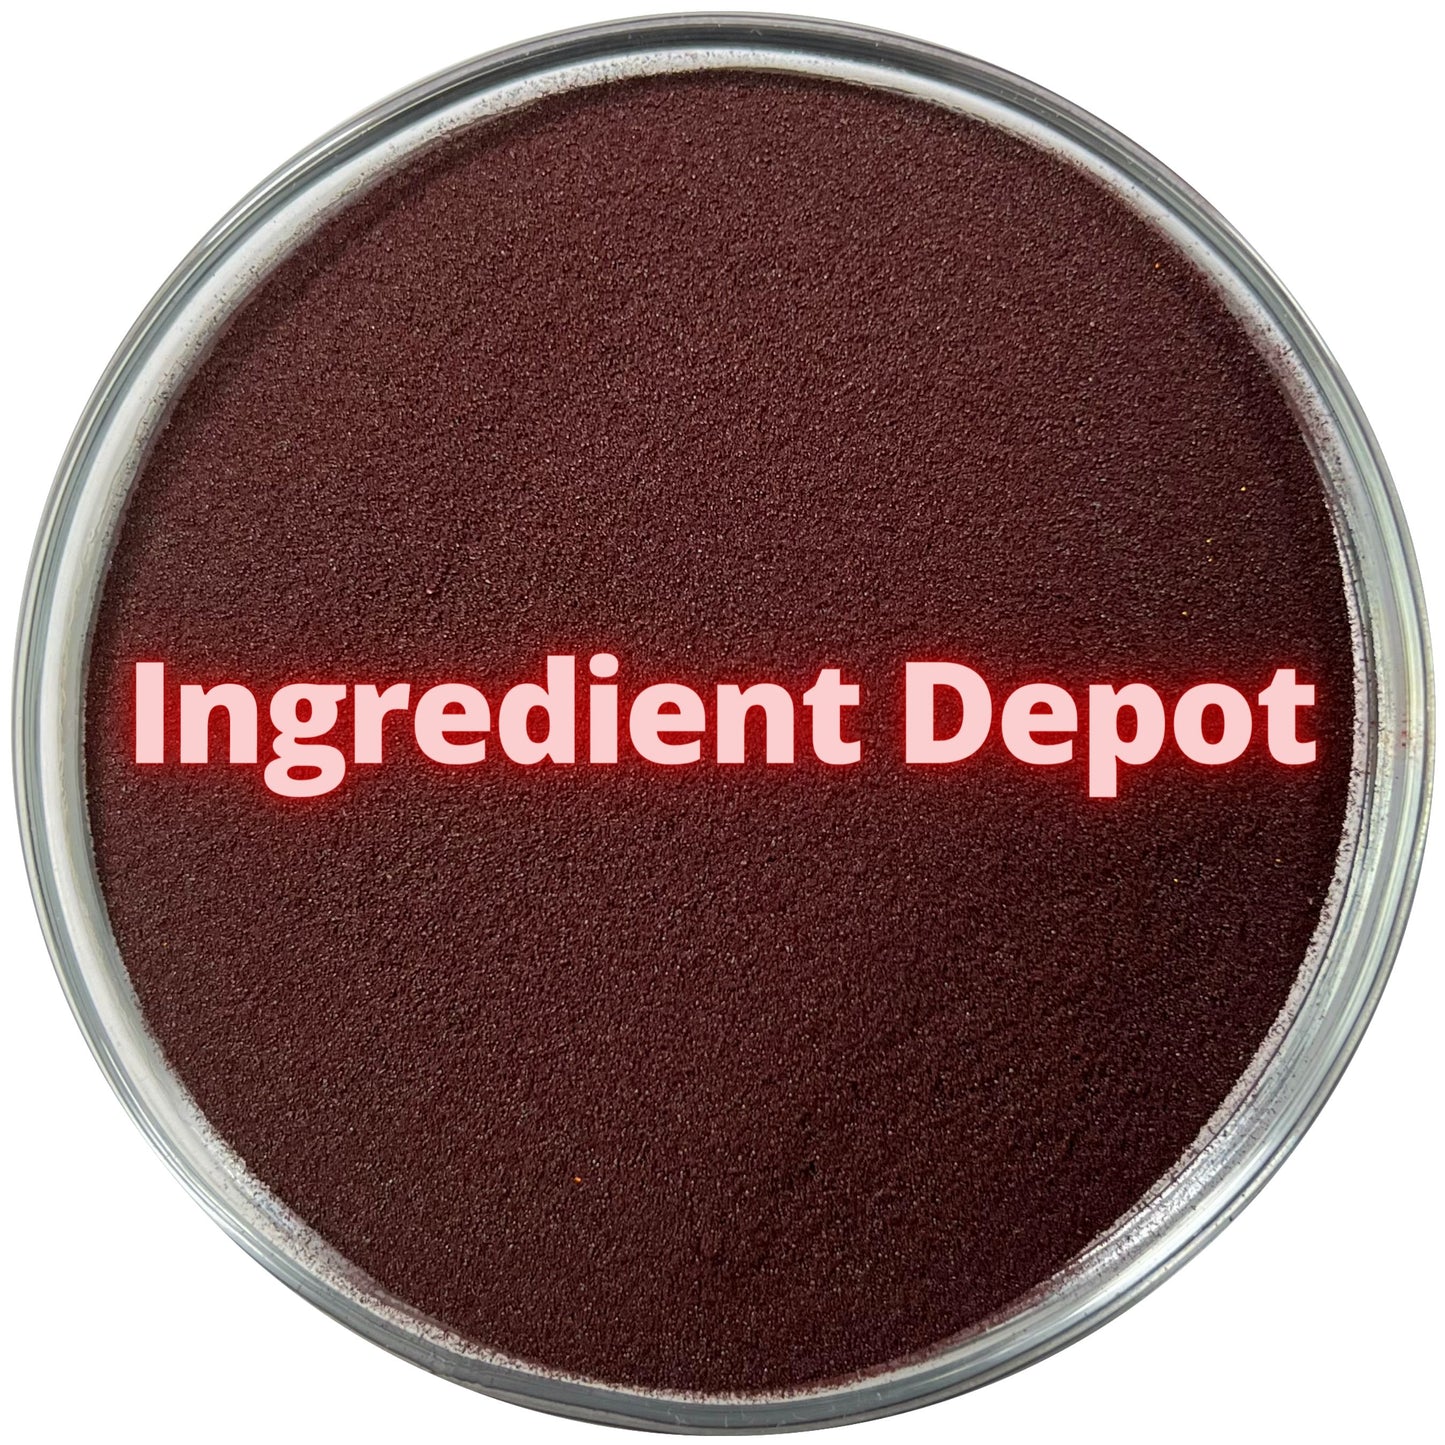 Red No. 40 FD&C Dye (Allura Red) Raw Material